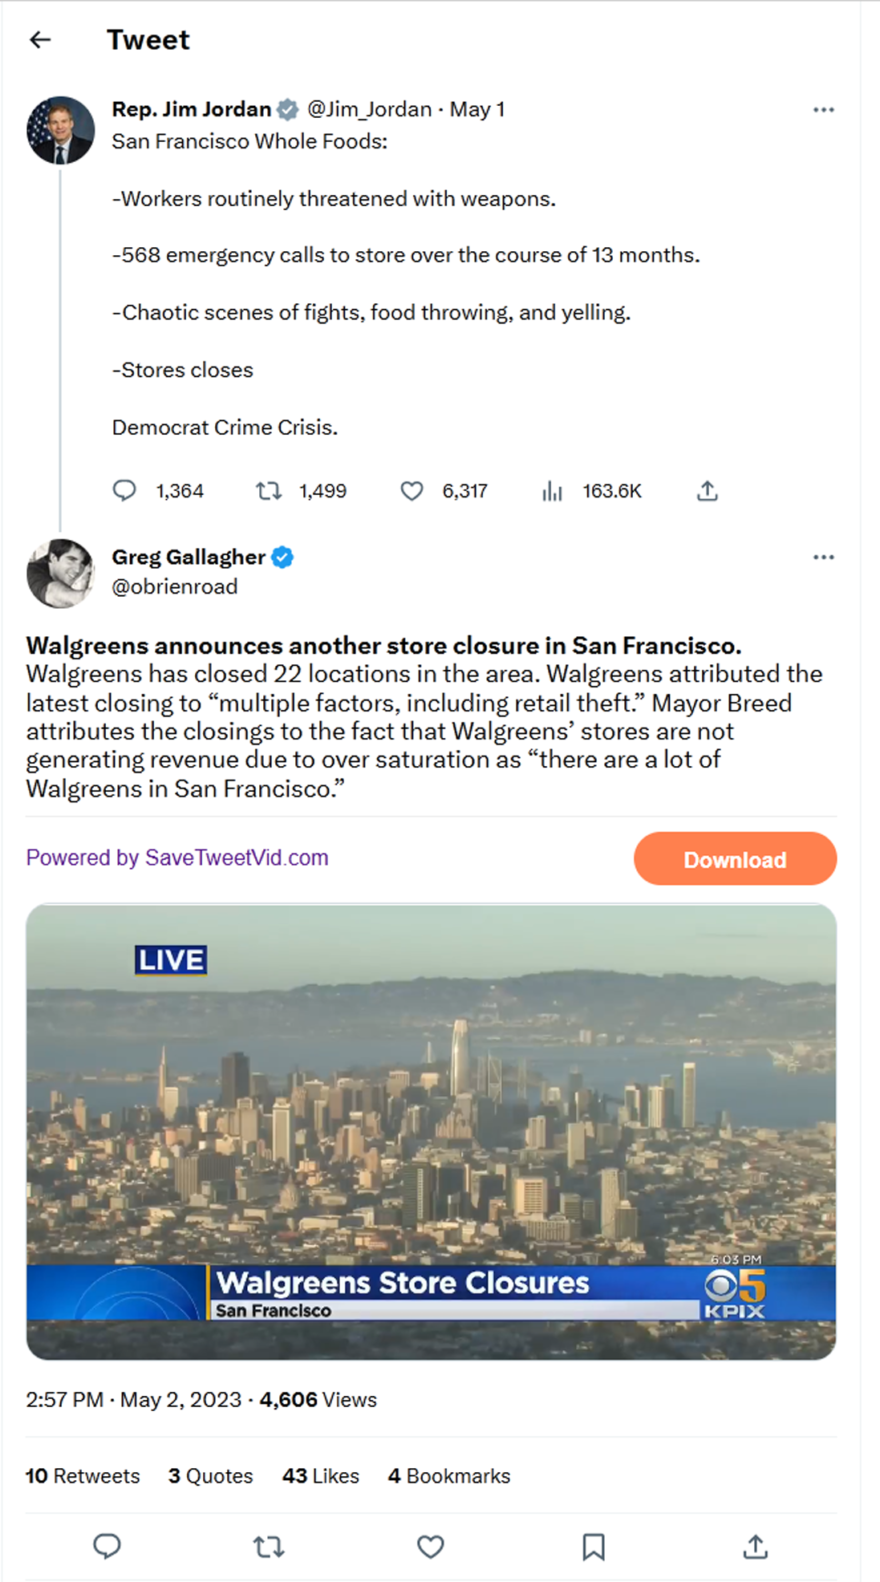 Greg Gallagher-tweet-2May2023-Walgreens announces another store closure in San Francisco